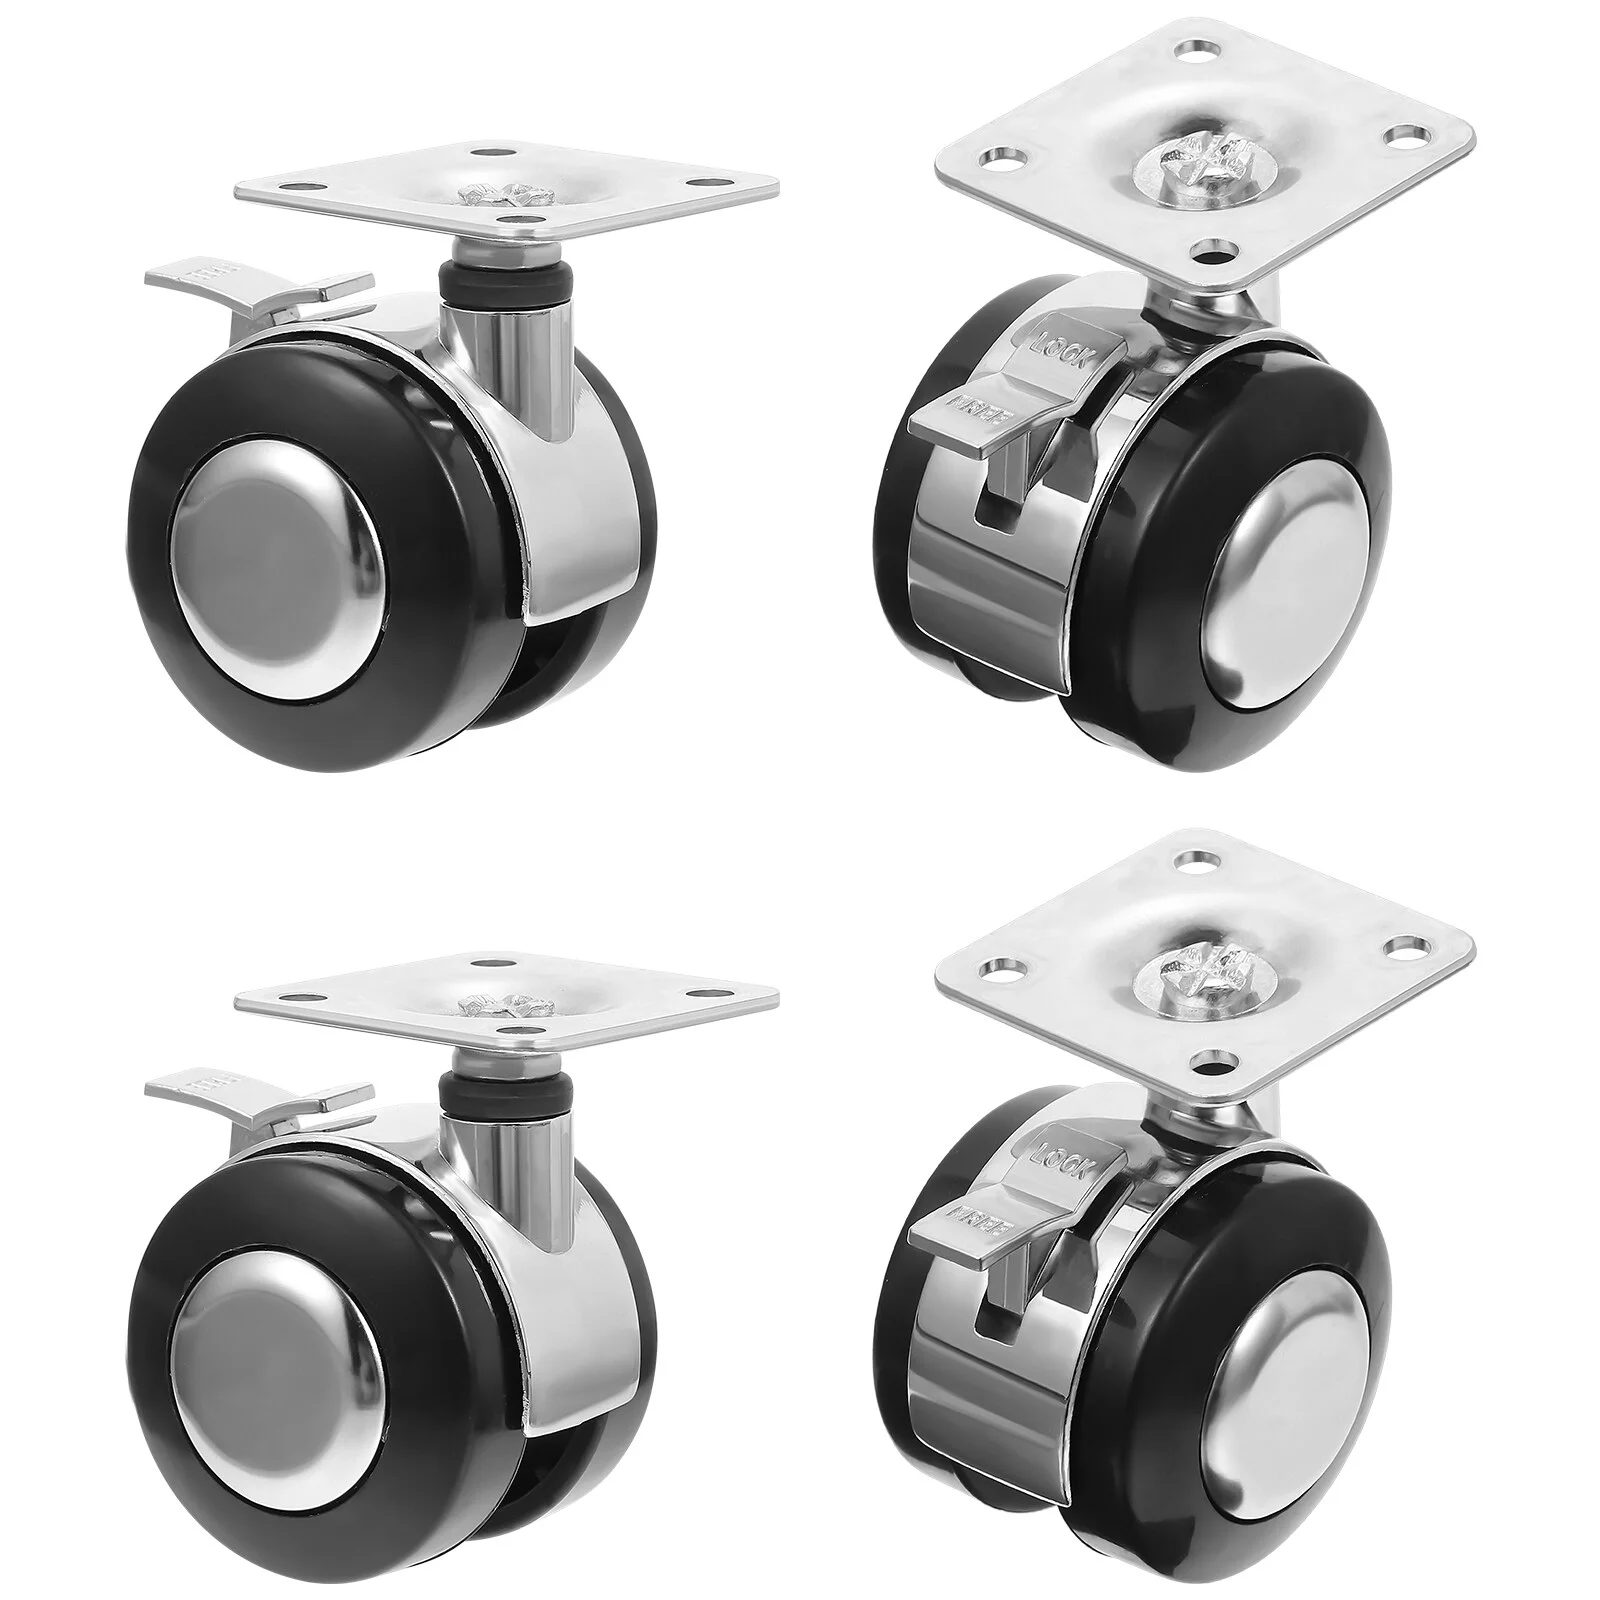 

Office Chair Wheels Desk Casters: Floor Chairs Cart Replacement Roller Wheel Furniture Rolling Caster Table Swivel Floors